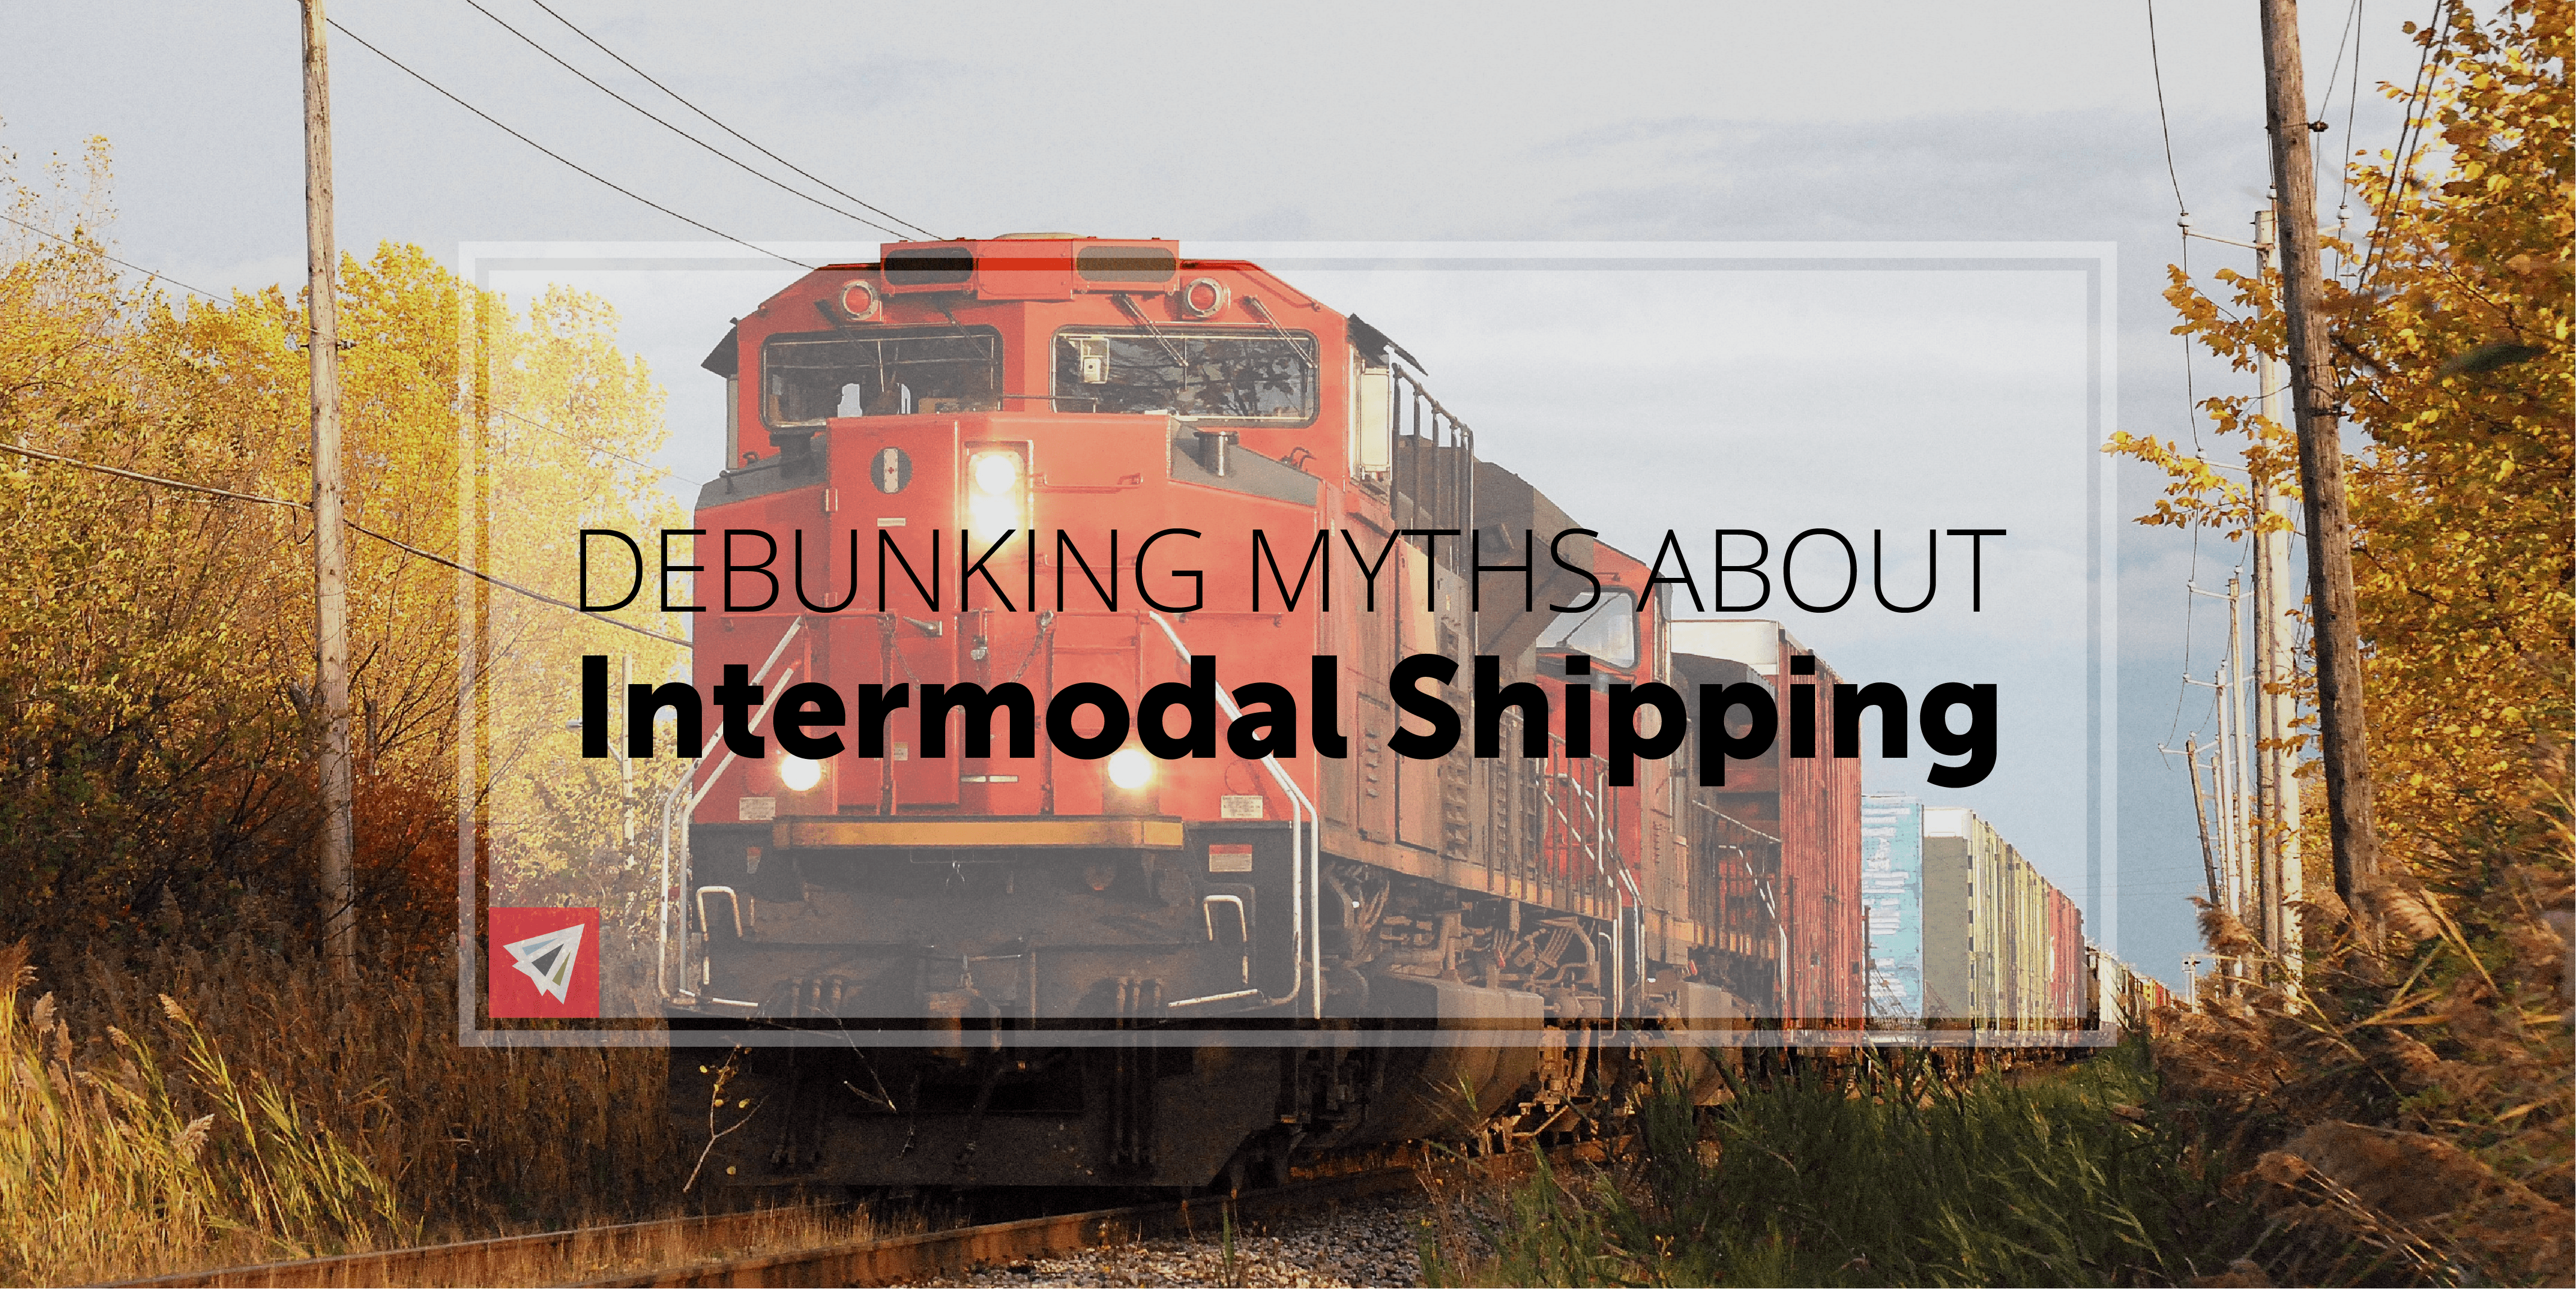 Debunking Myths About Intermodal Shipping